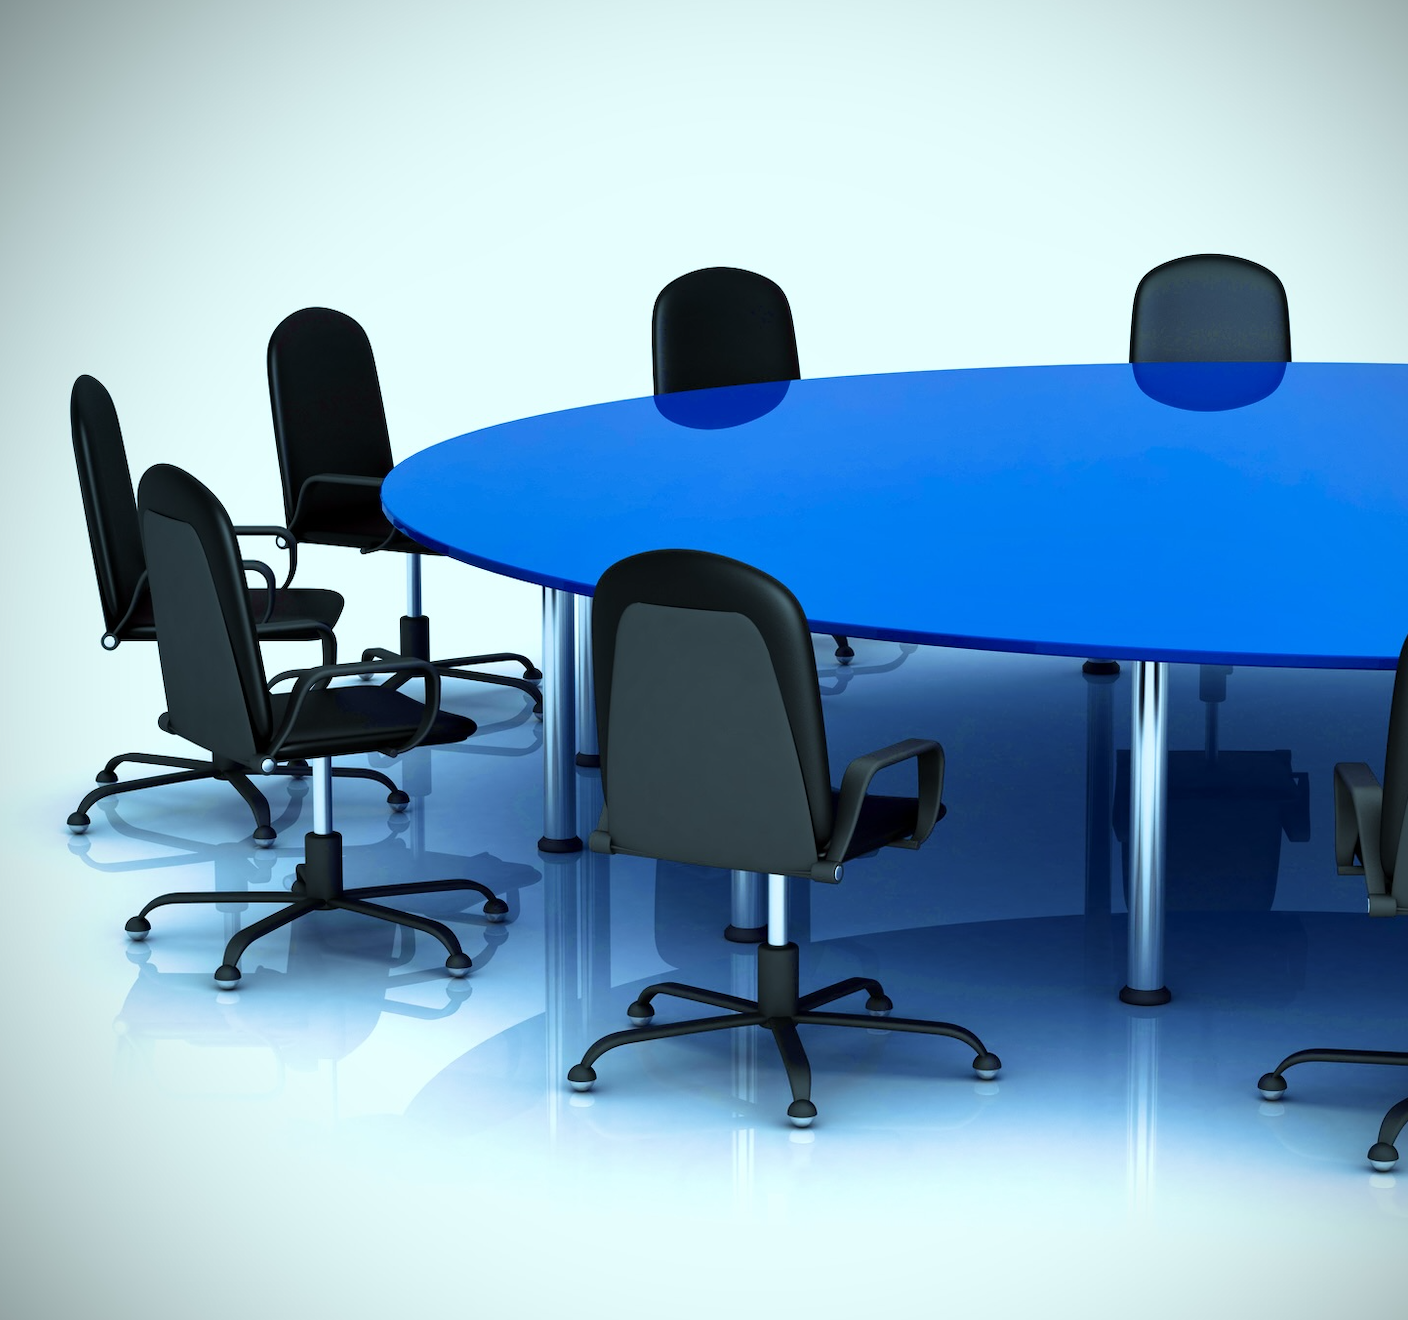 A photo of a bright blue oblong boardroom table surrounded by chairs